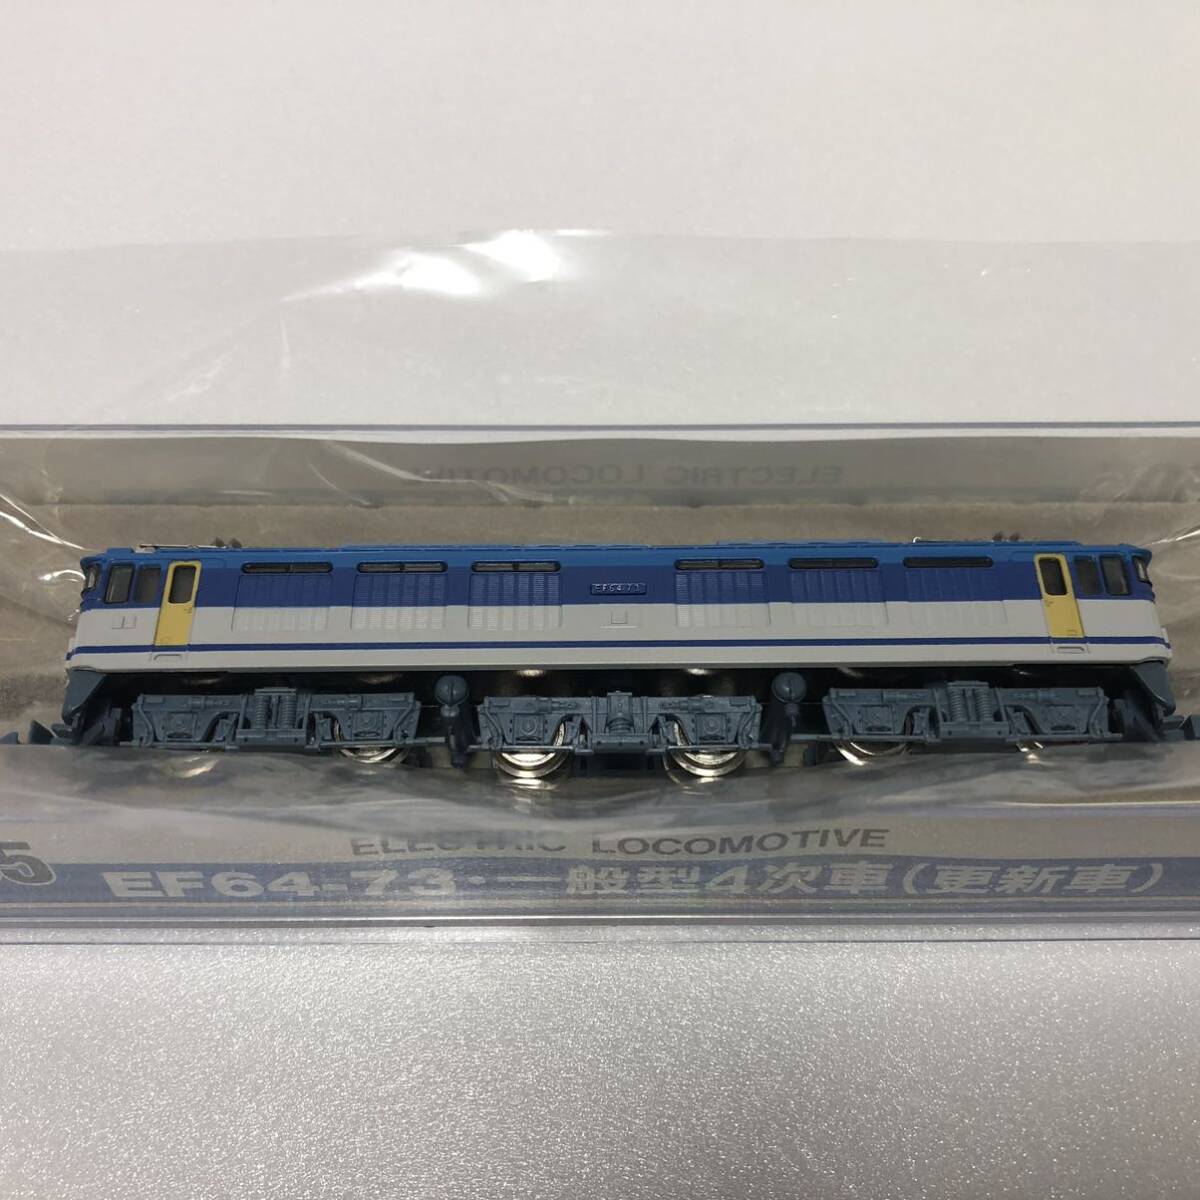 *1 jpy start *A3505 EF64-73 one next type 4 next car ( update car ) electric locomotive JR micro Ace 